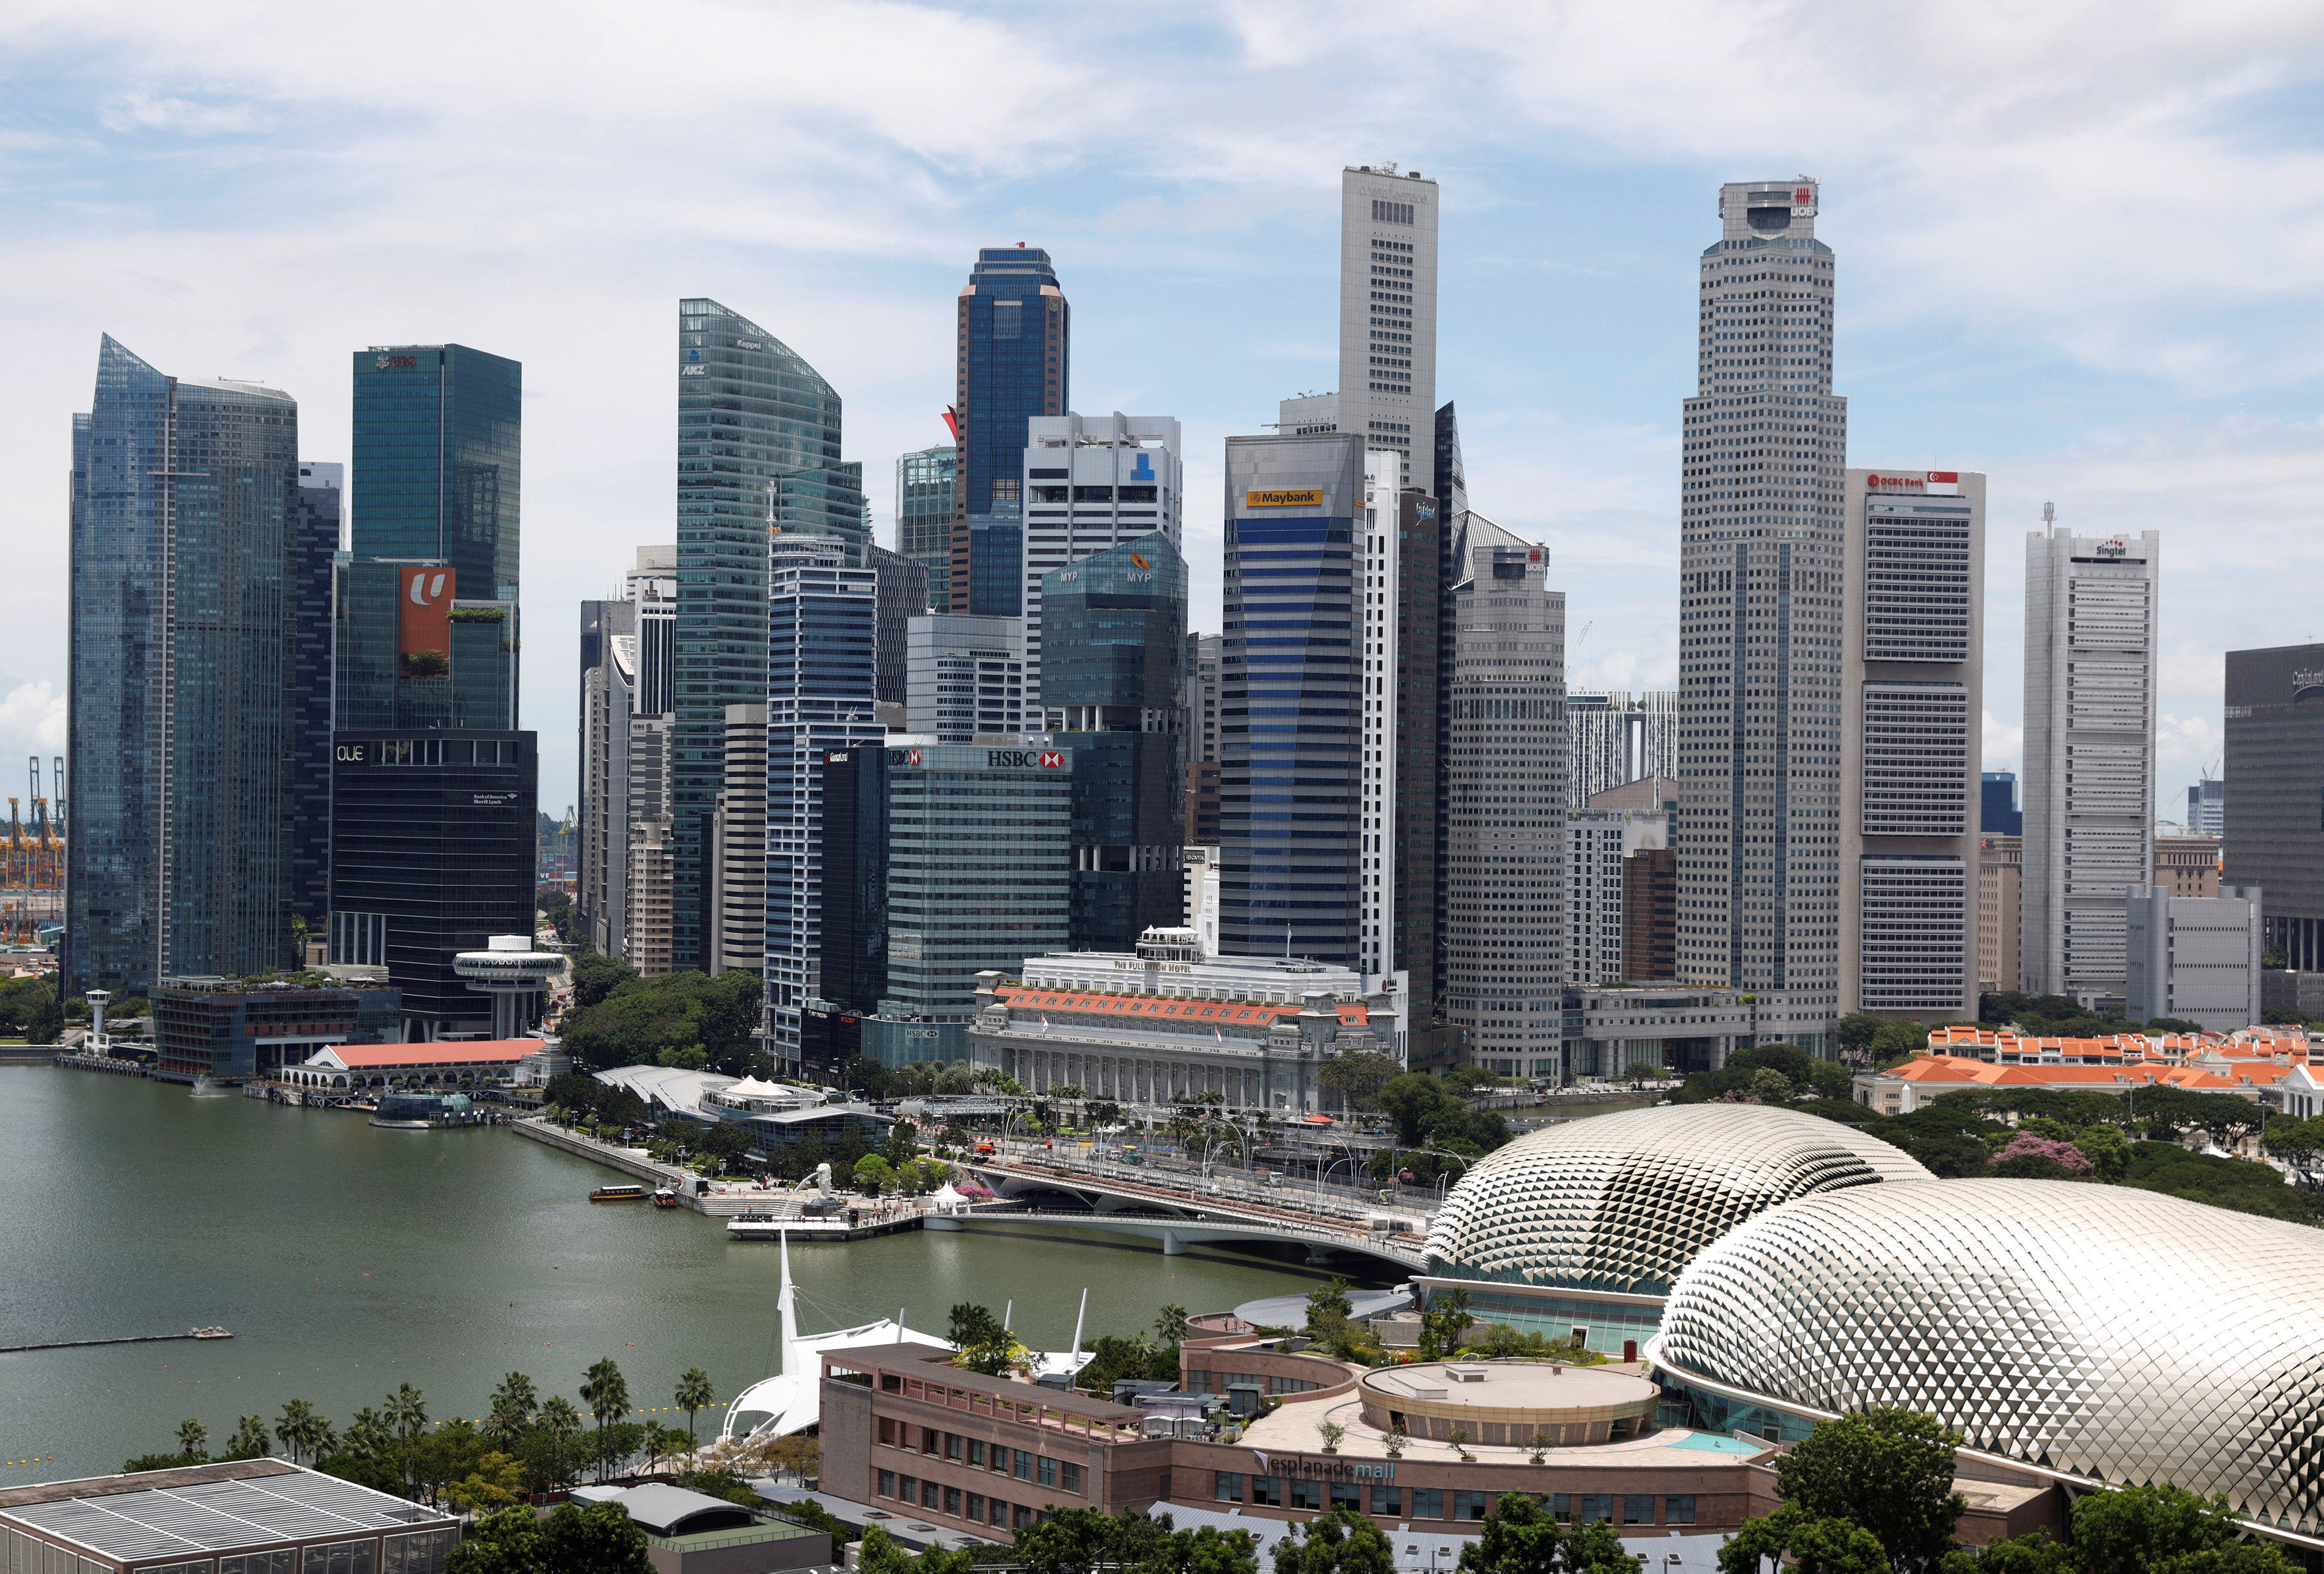 Singapore’s skyline. A 39-year-old was sentenced to jail for 25 months for having commercial sex with a minor. Photo: Reuters